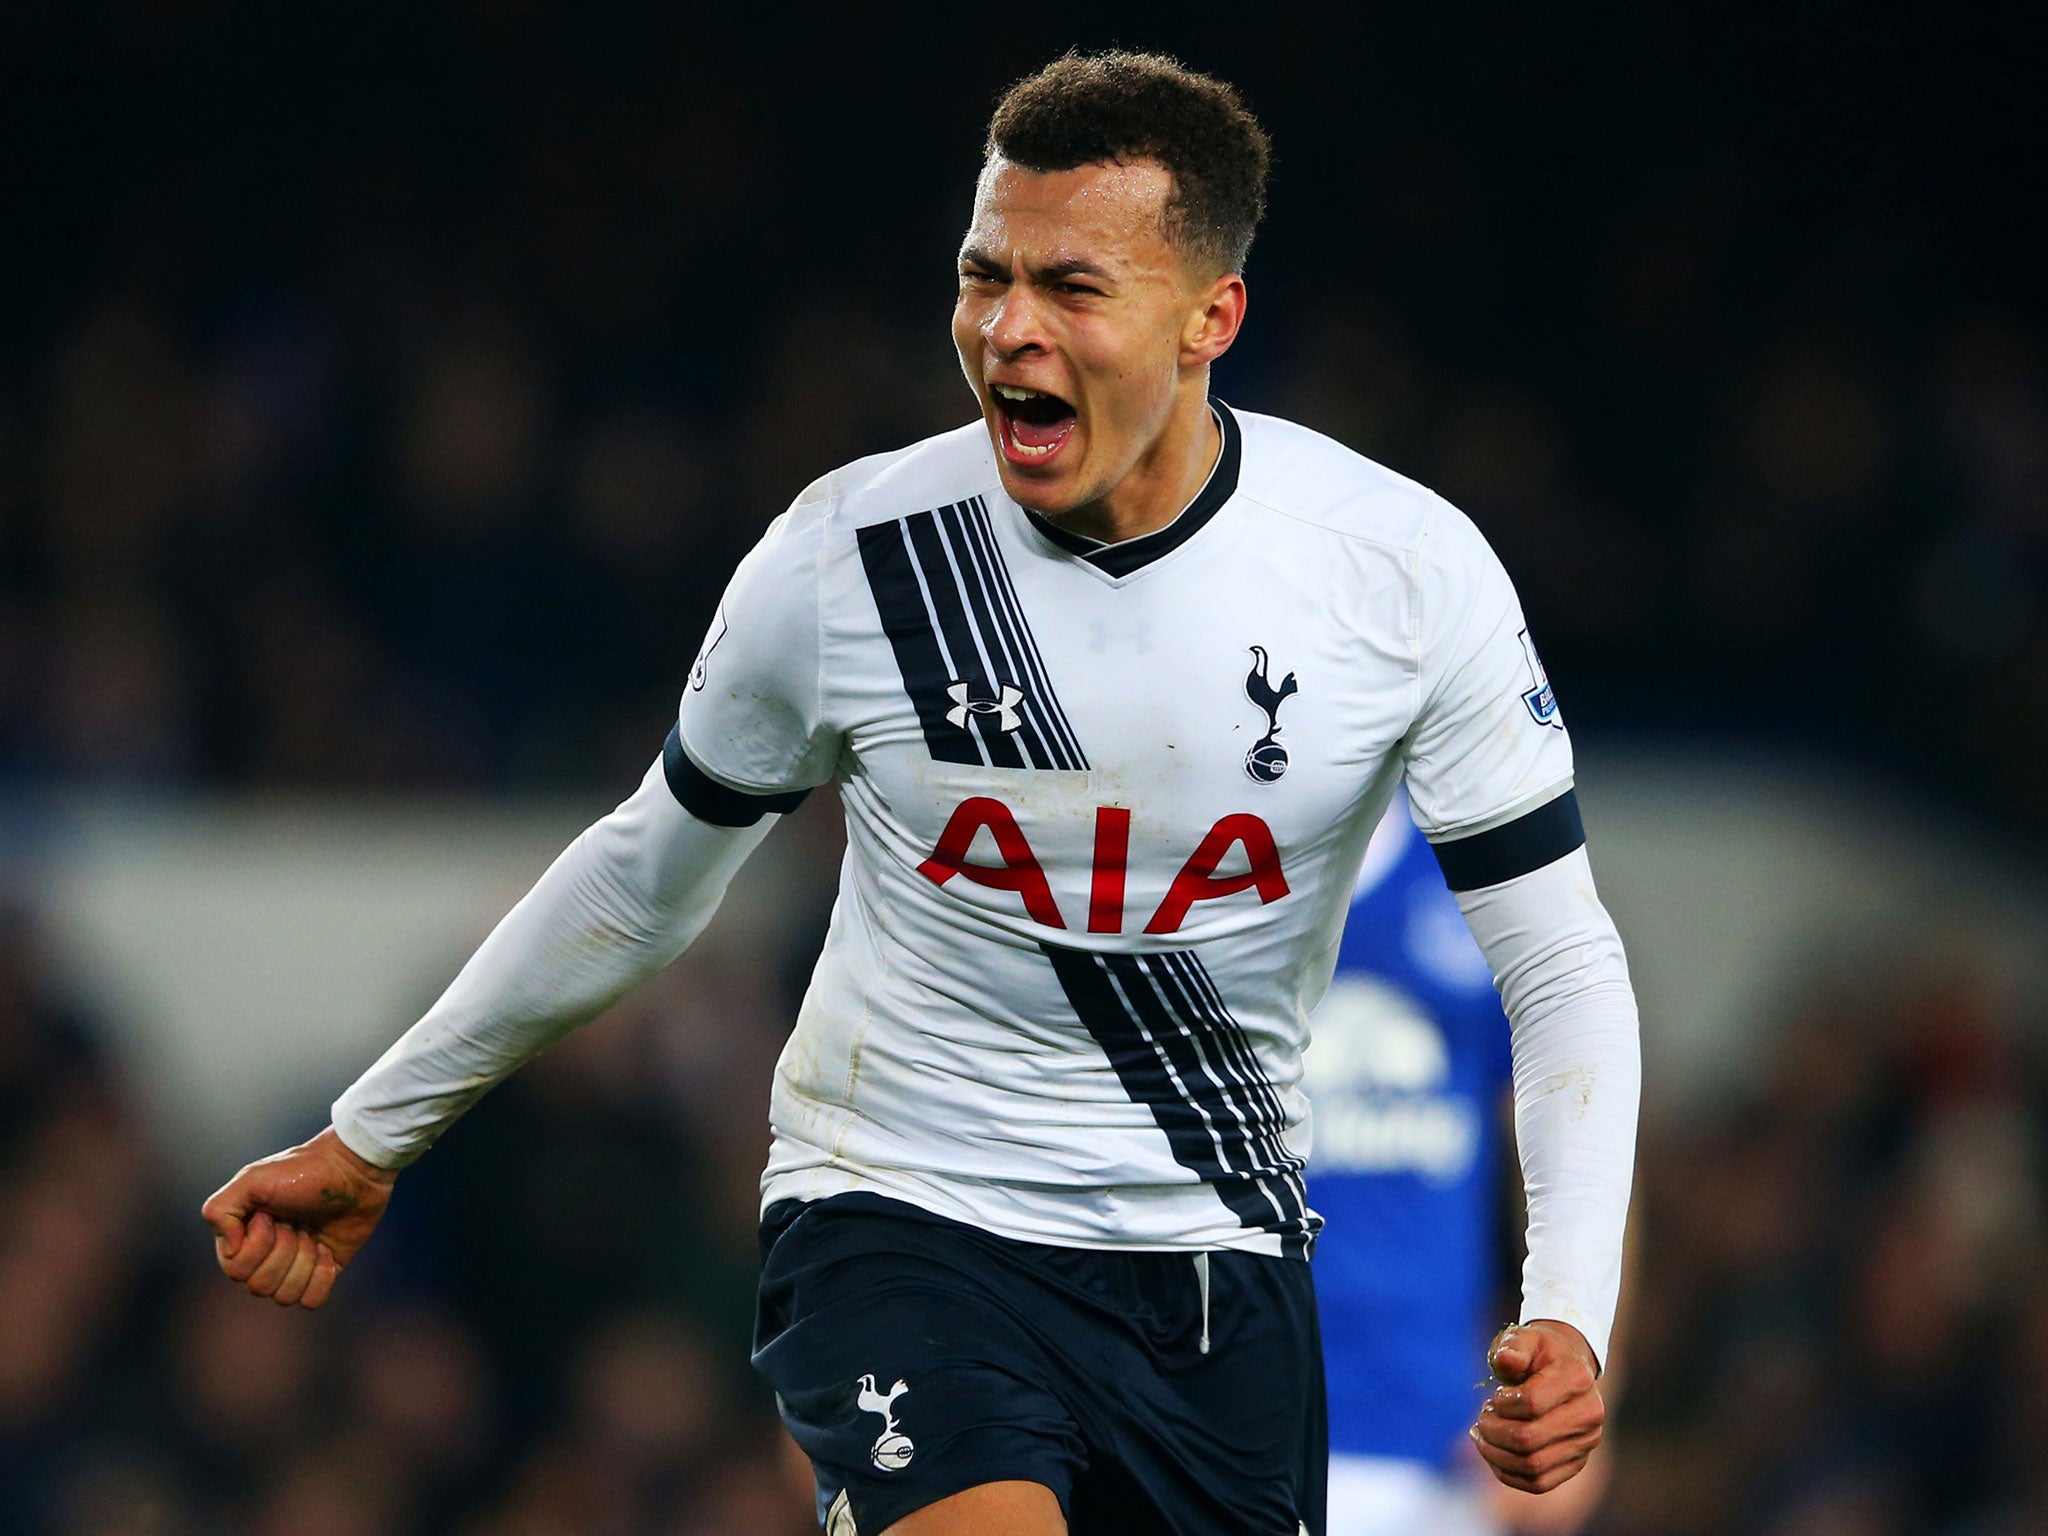 Dele Alli has signed a new Tottenham contract through to 2021